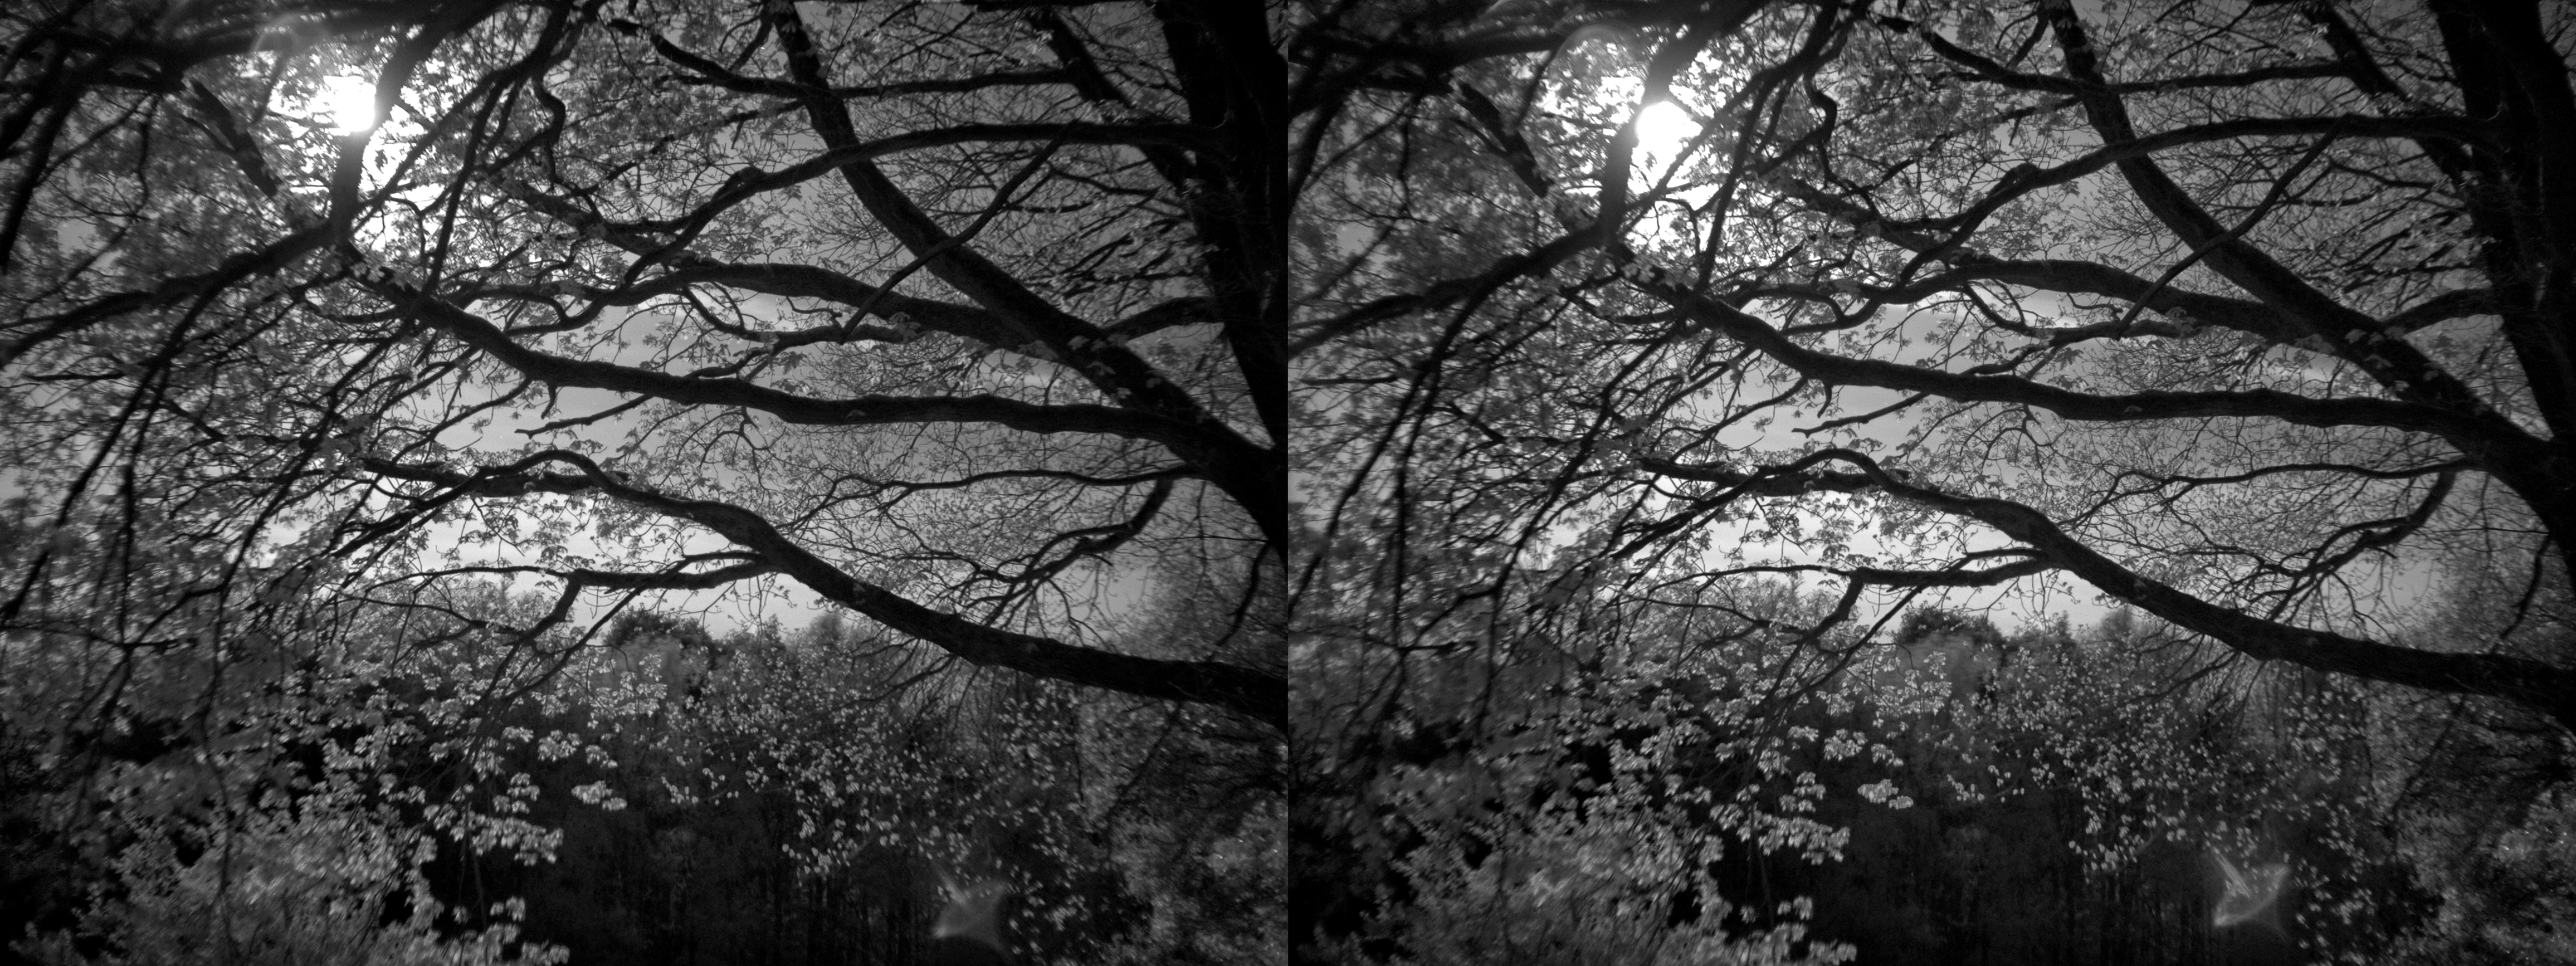 A detail of the brances of trees. They run from right to left through the frame. The sky is bright, due to the moon. The moon pierces through the branches on the left. The leaves make a glittery display.